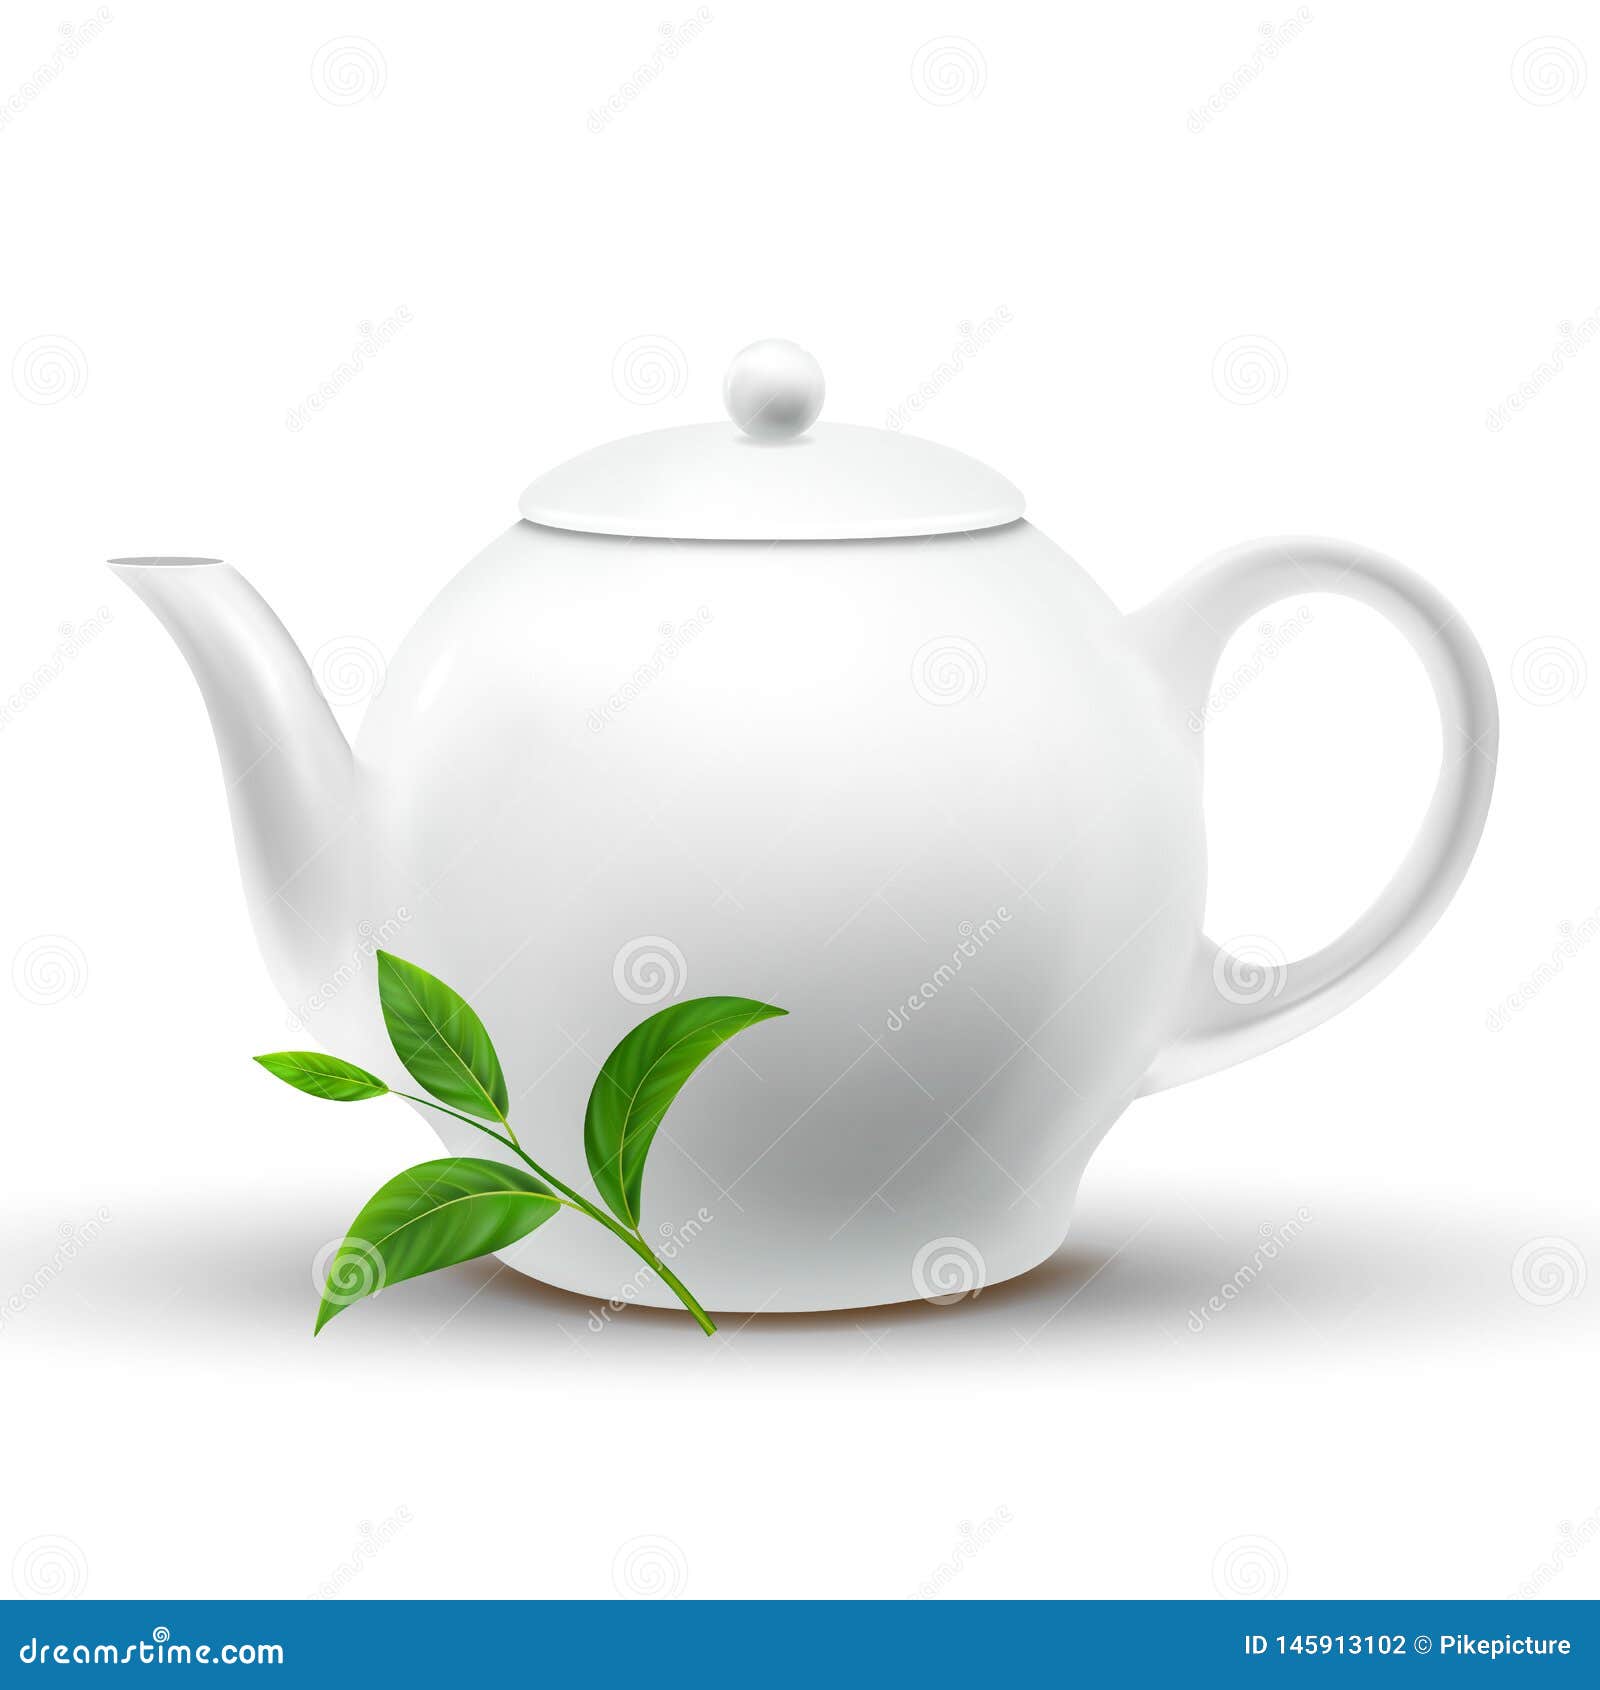 Download Ceramic White Teapot With Vector Green Tea Leaf Stock ...